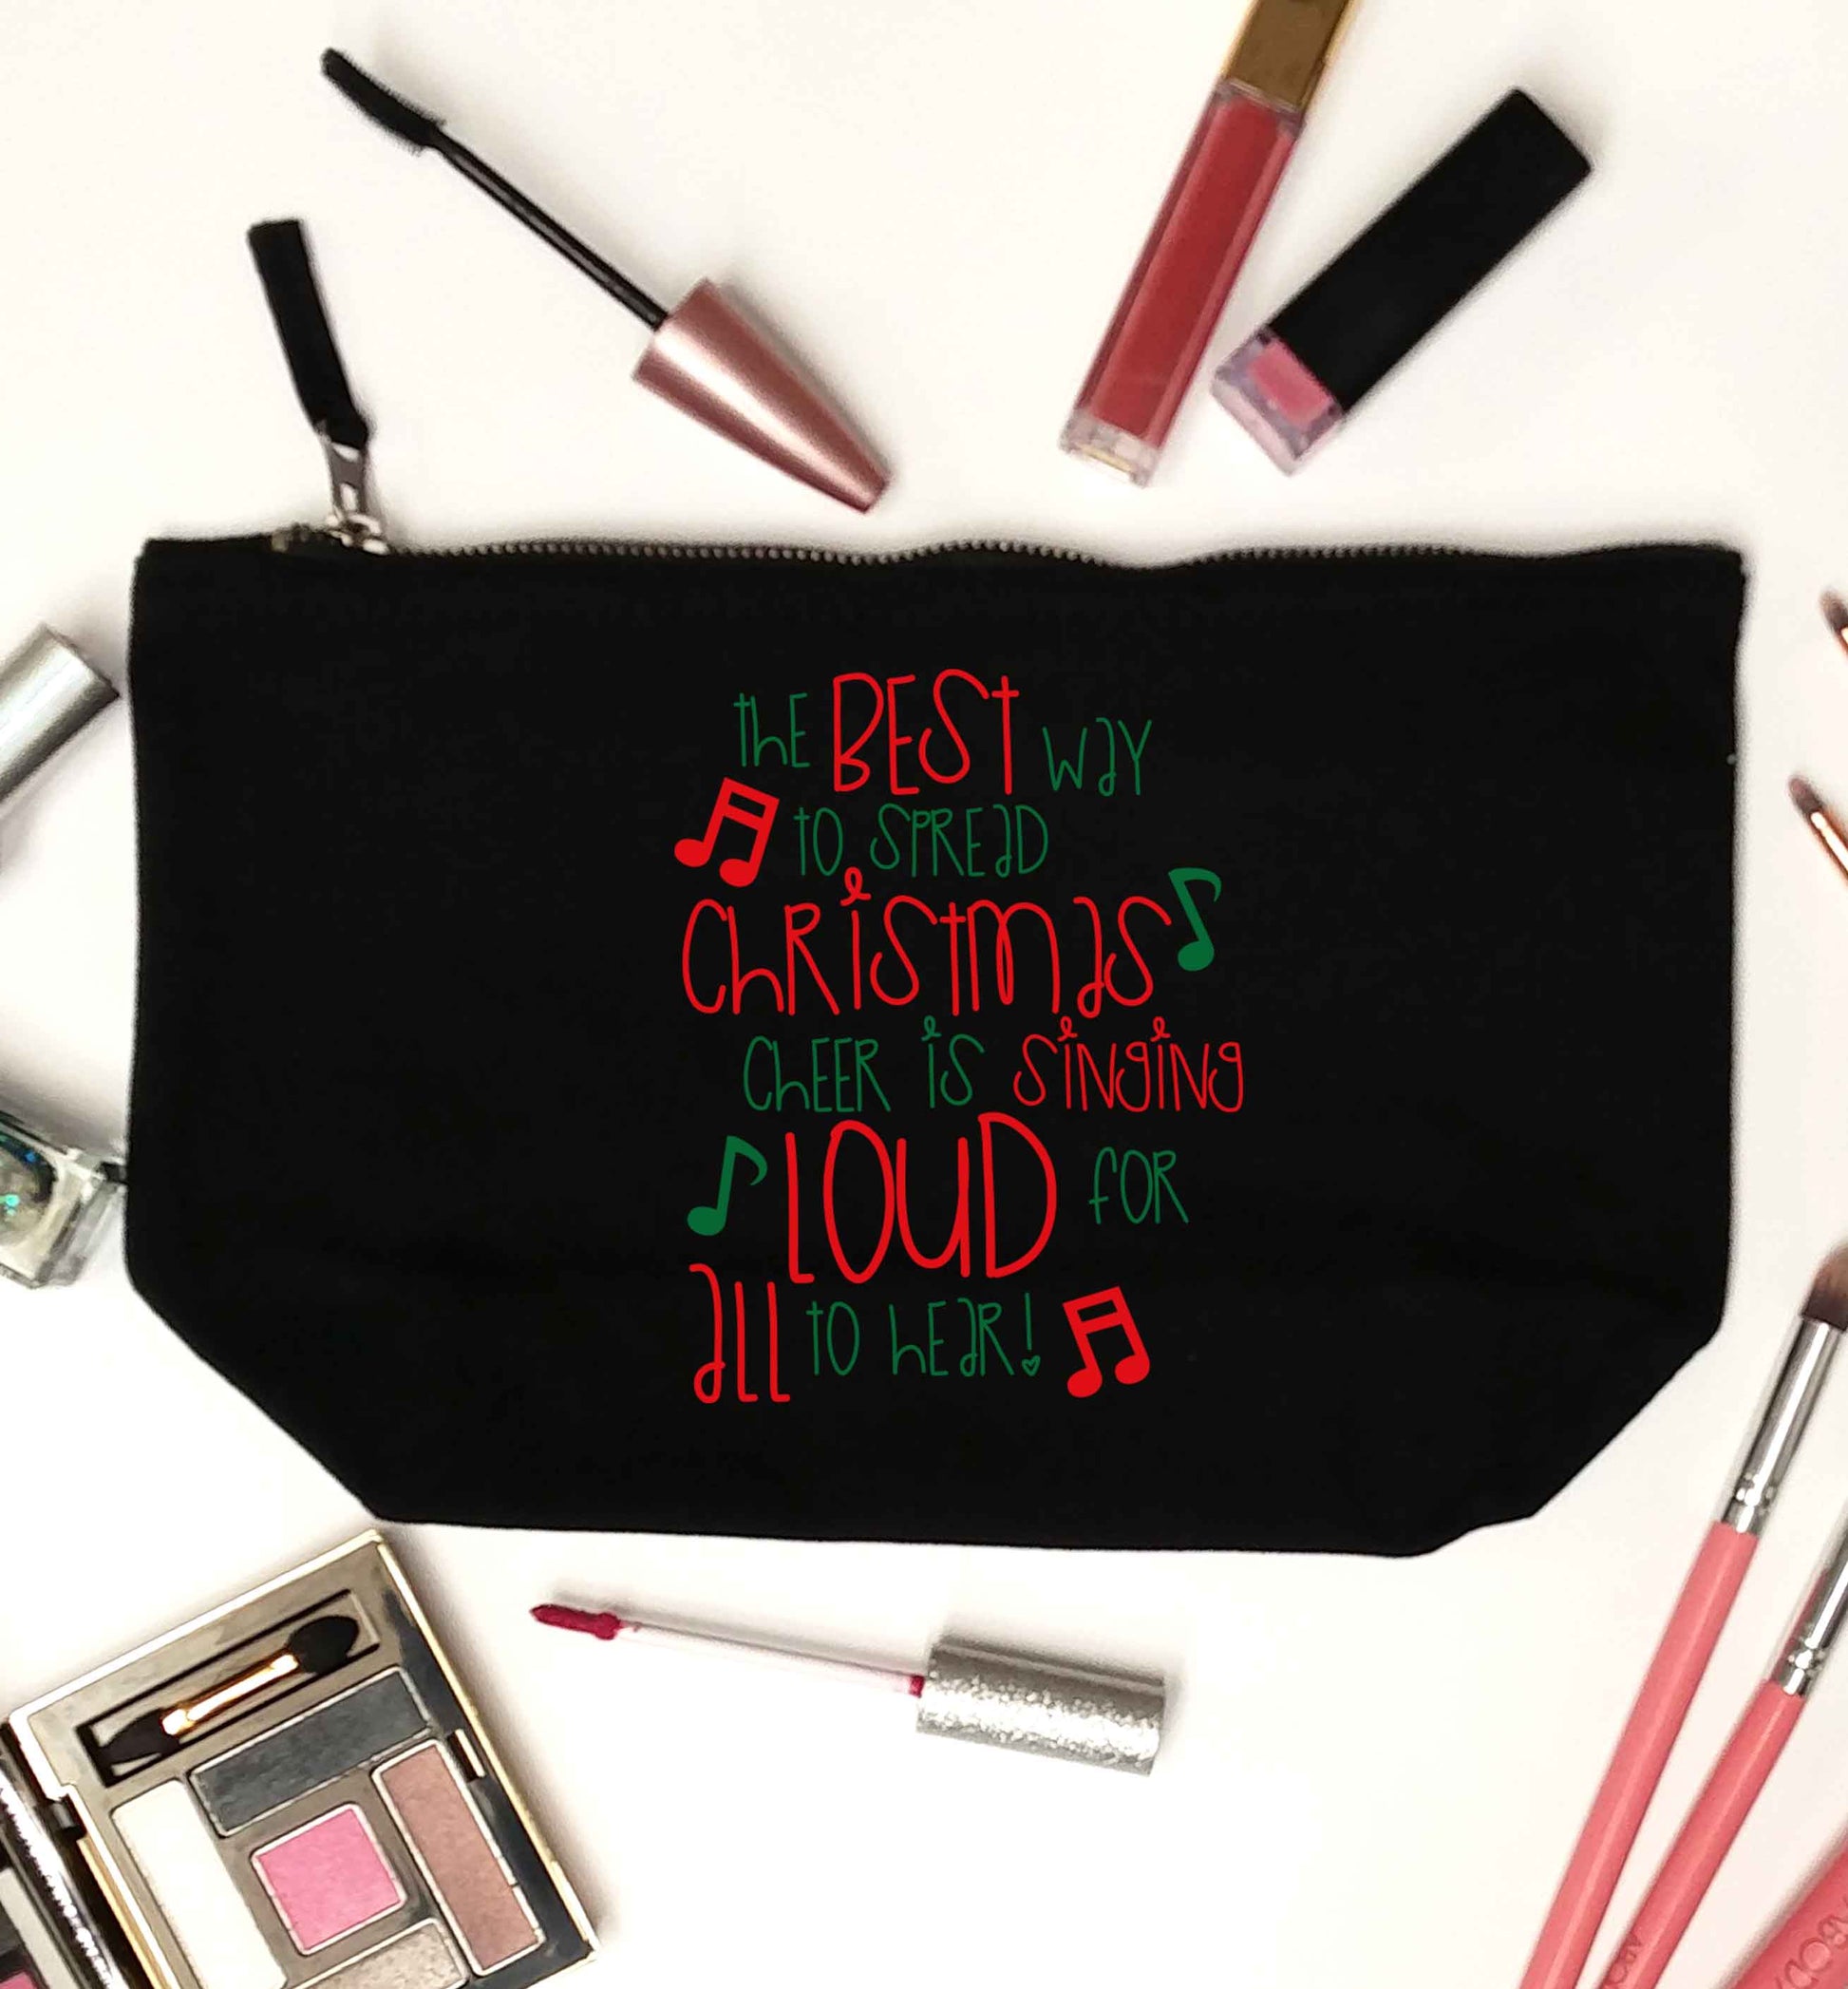 The best way to spread Christmas cheer is singing loud for all to hear black makeup bag